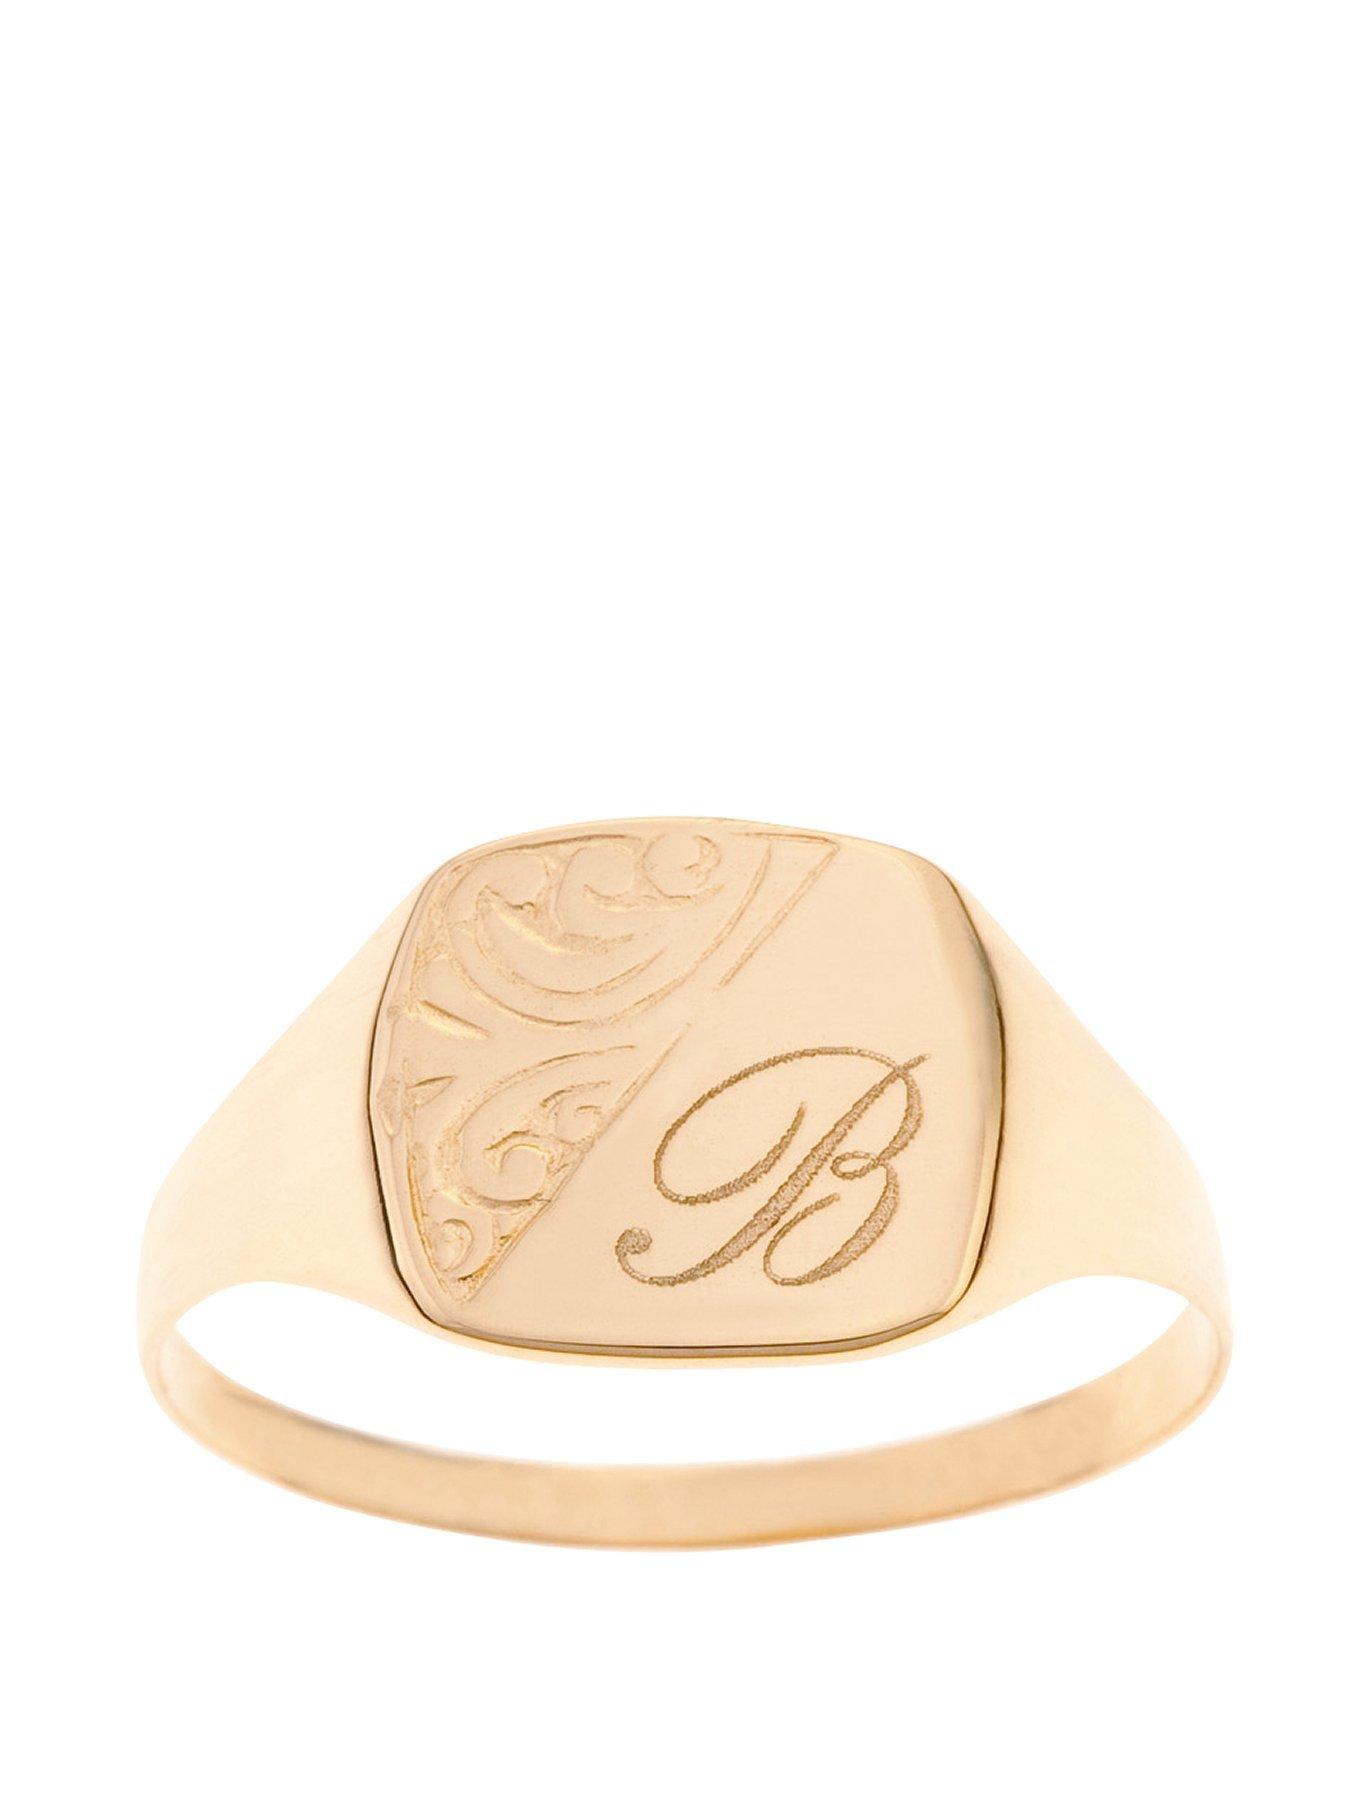 Jewellery & watches Personalised 9 Carat Yellow Gold Half Engraved Ring